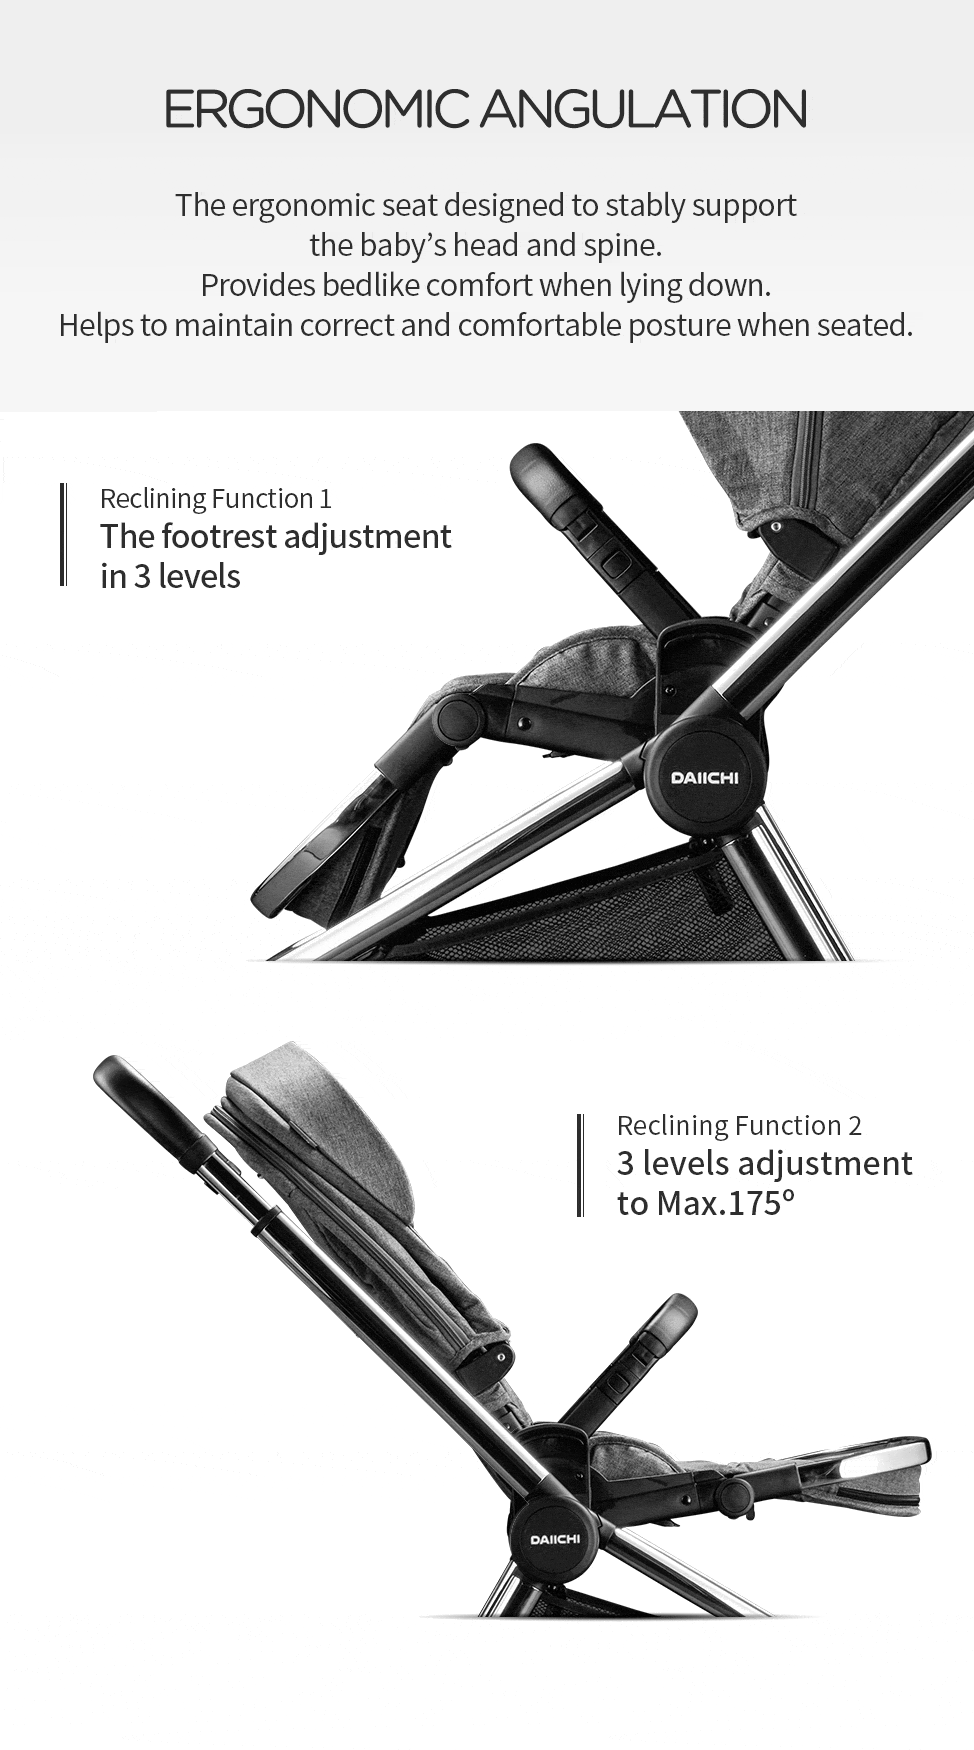 The footrest adjustment in 3 levels. 3 levels adjustment to Max. 175˚